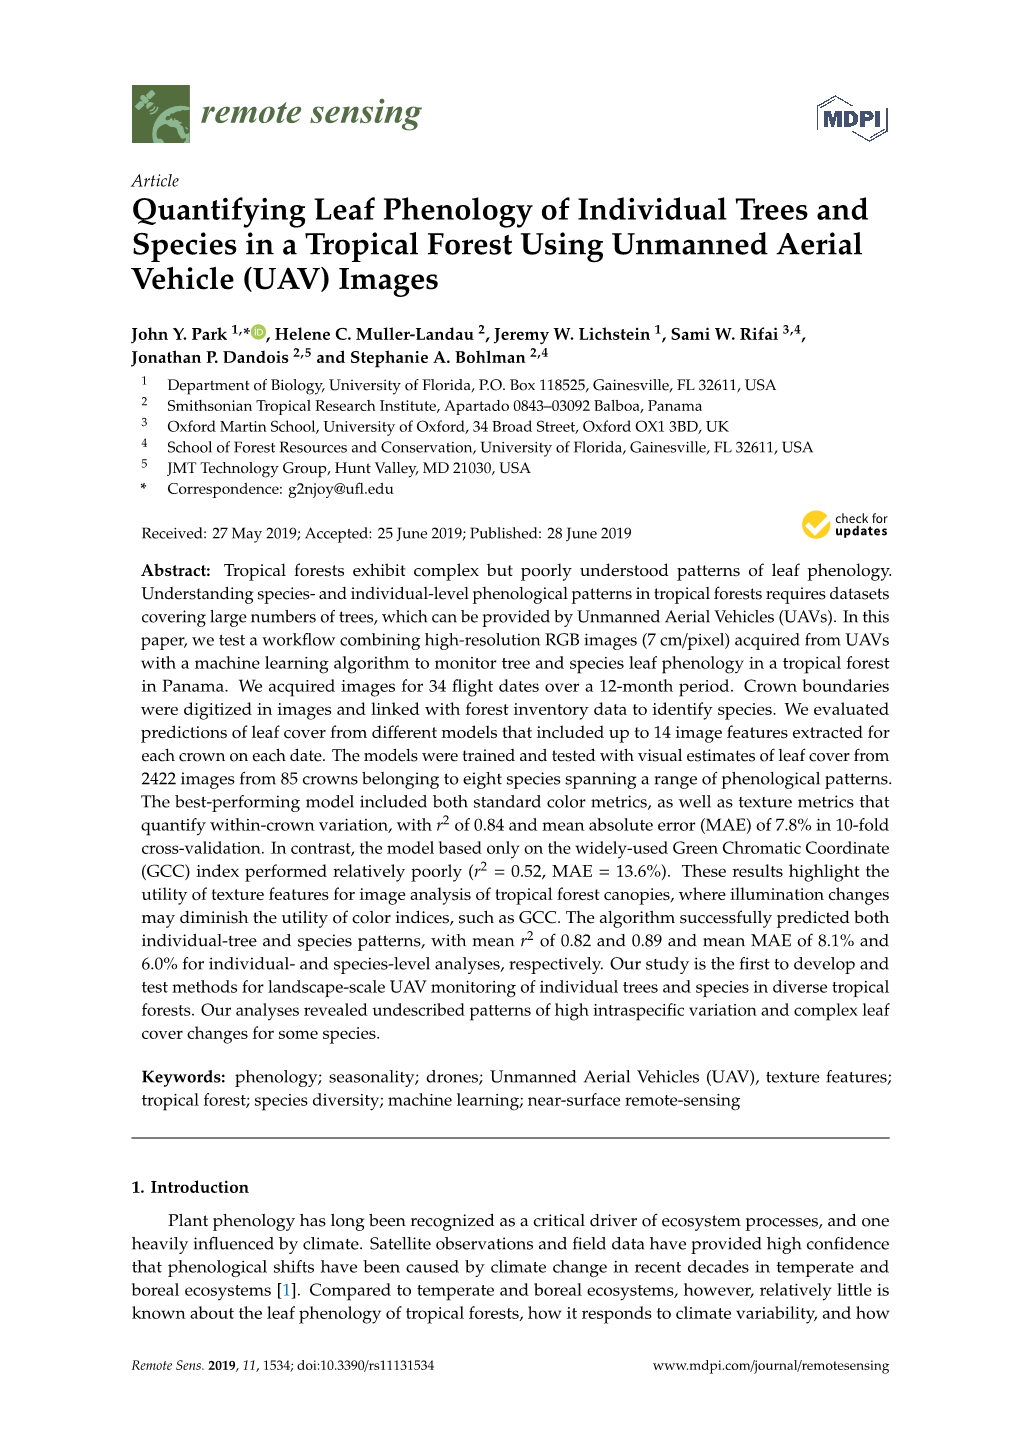 Quantifying Leaf Phenology of Individual Trees and Species in a Tropical Forest Using Unmanned Aerial Vehicle (UAV) Images